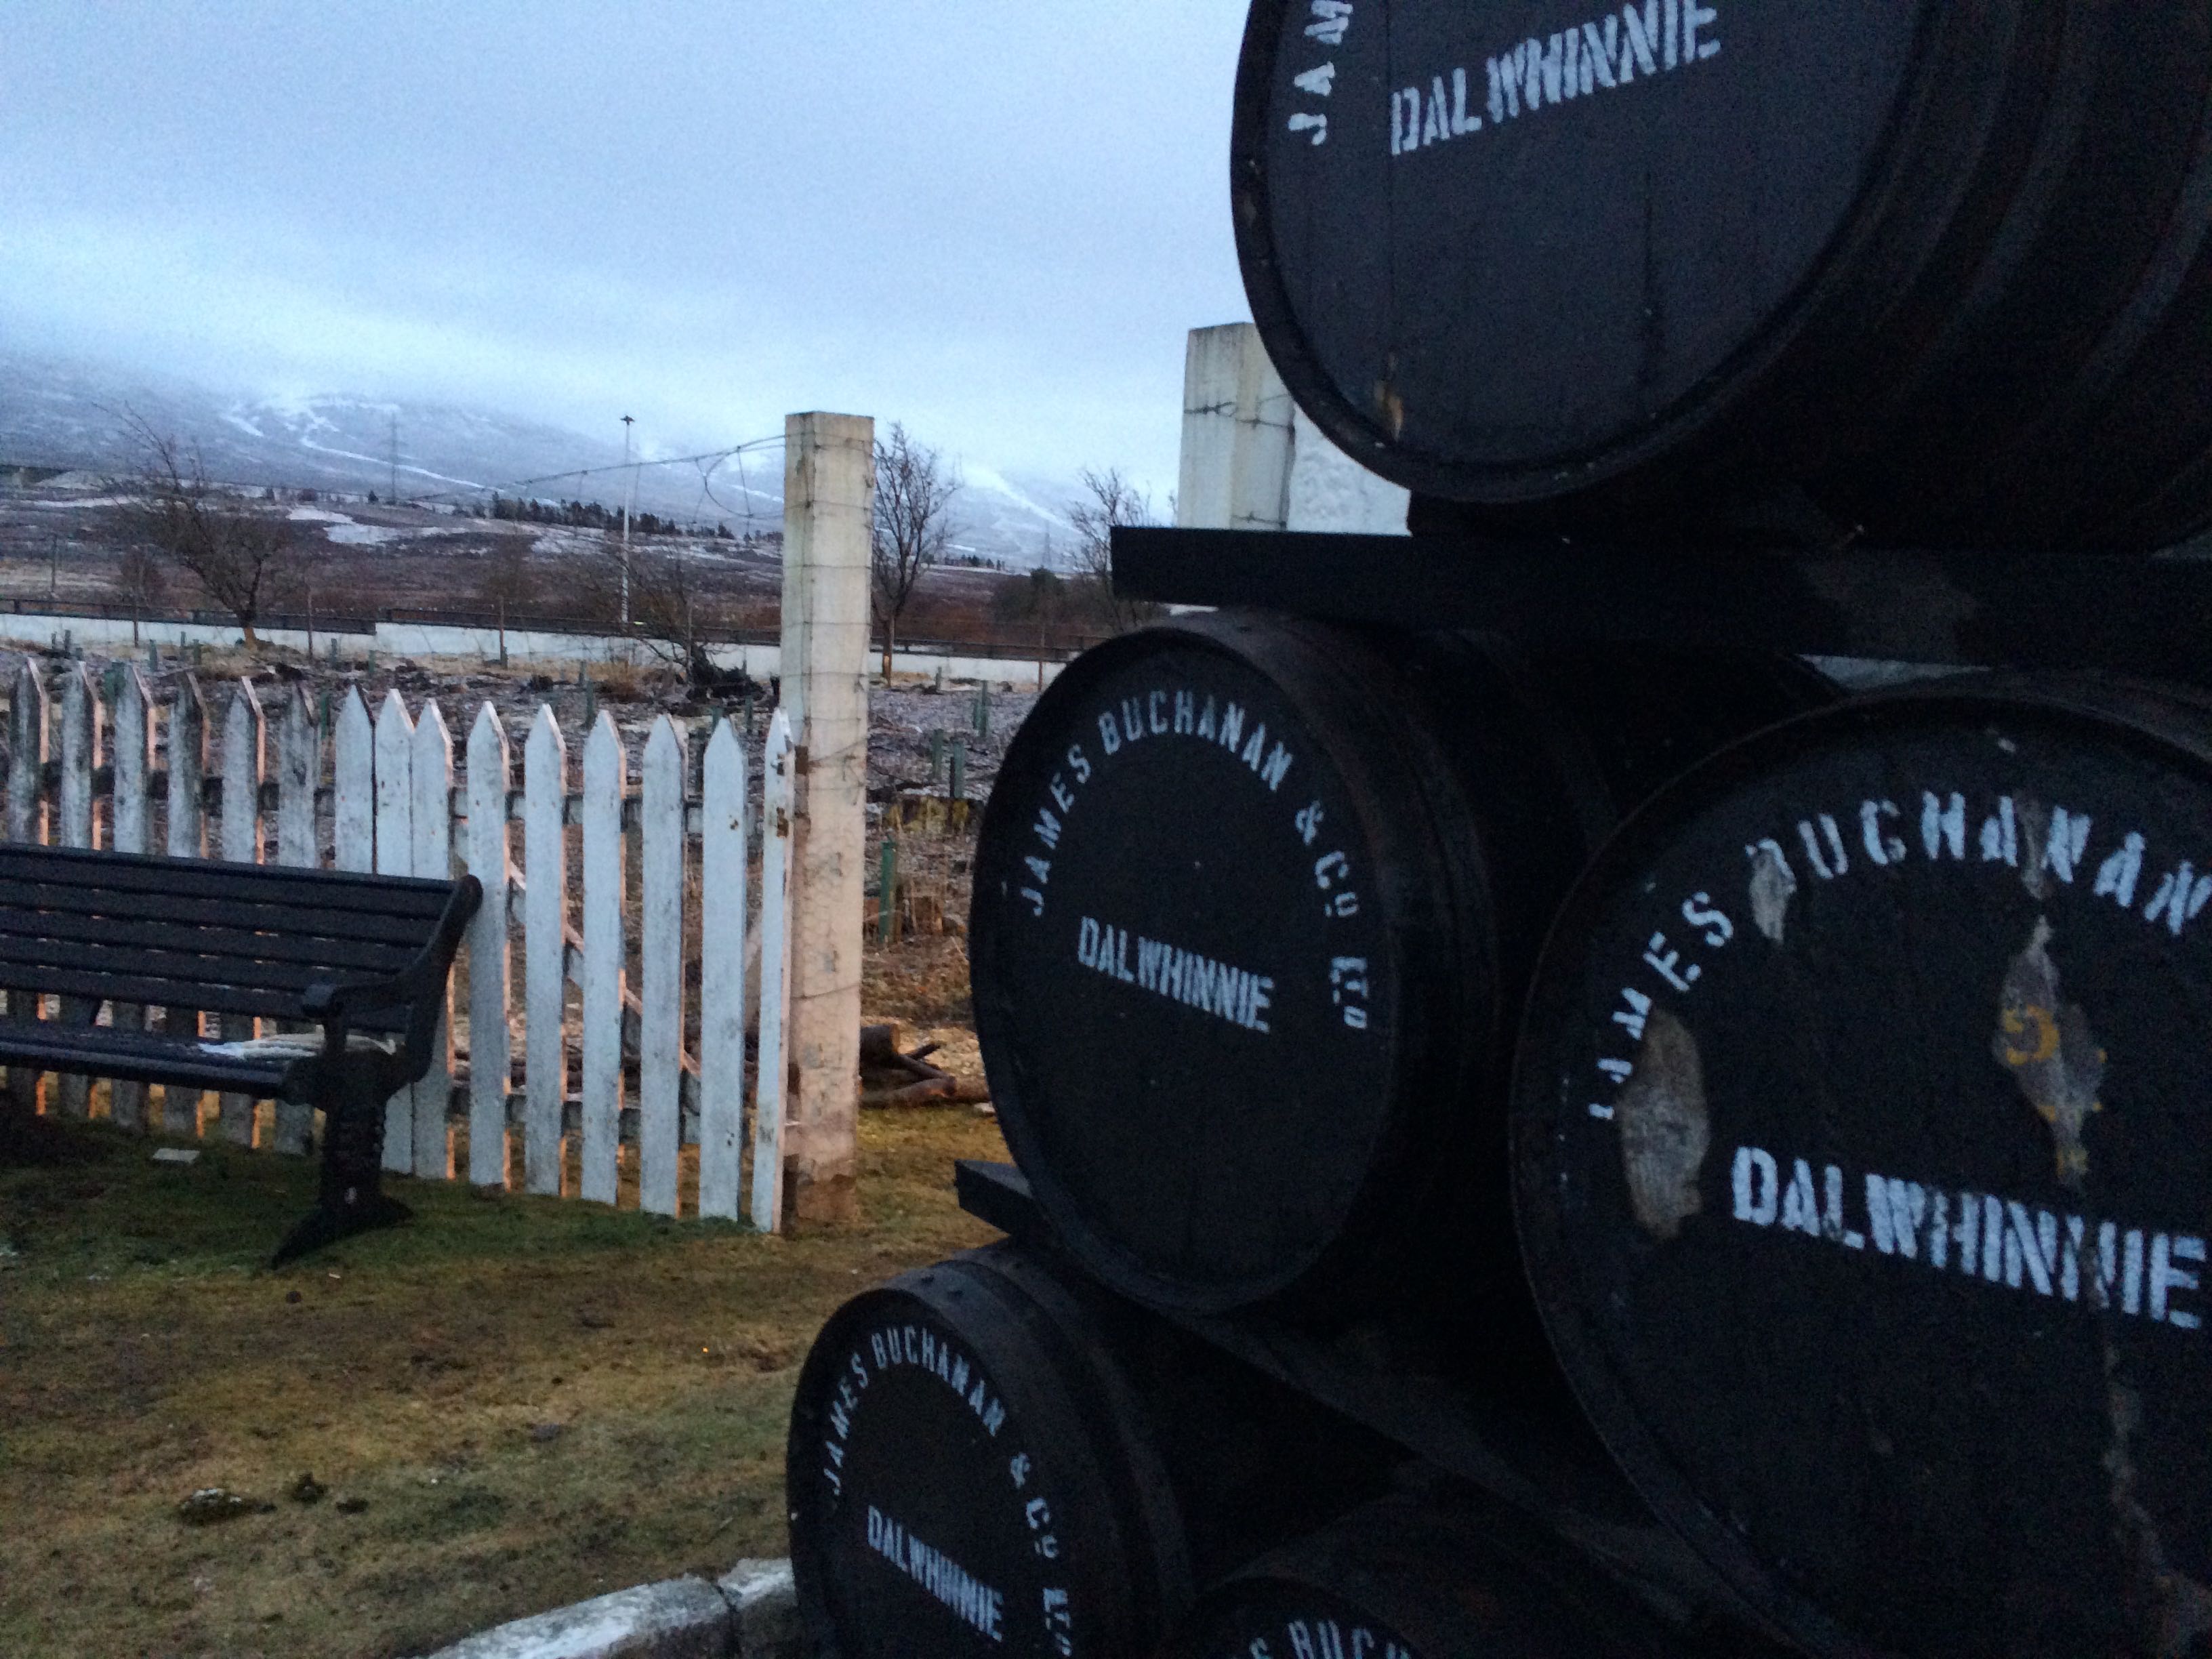 Dalwhinnie Winter’s Gold – a drop of the cold stuff